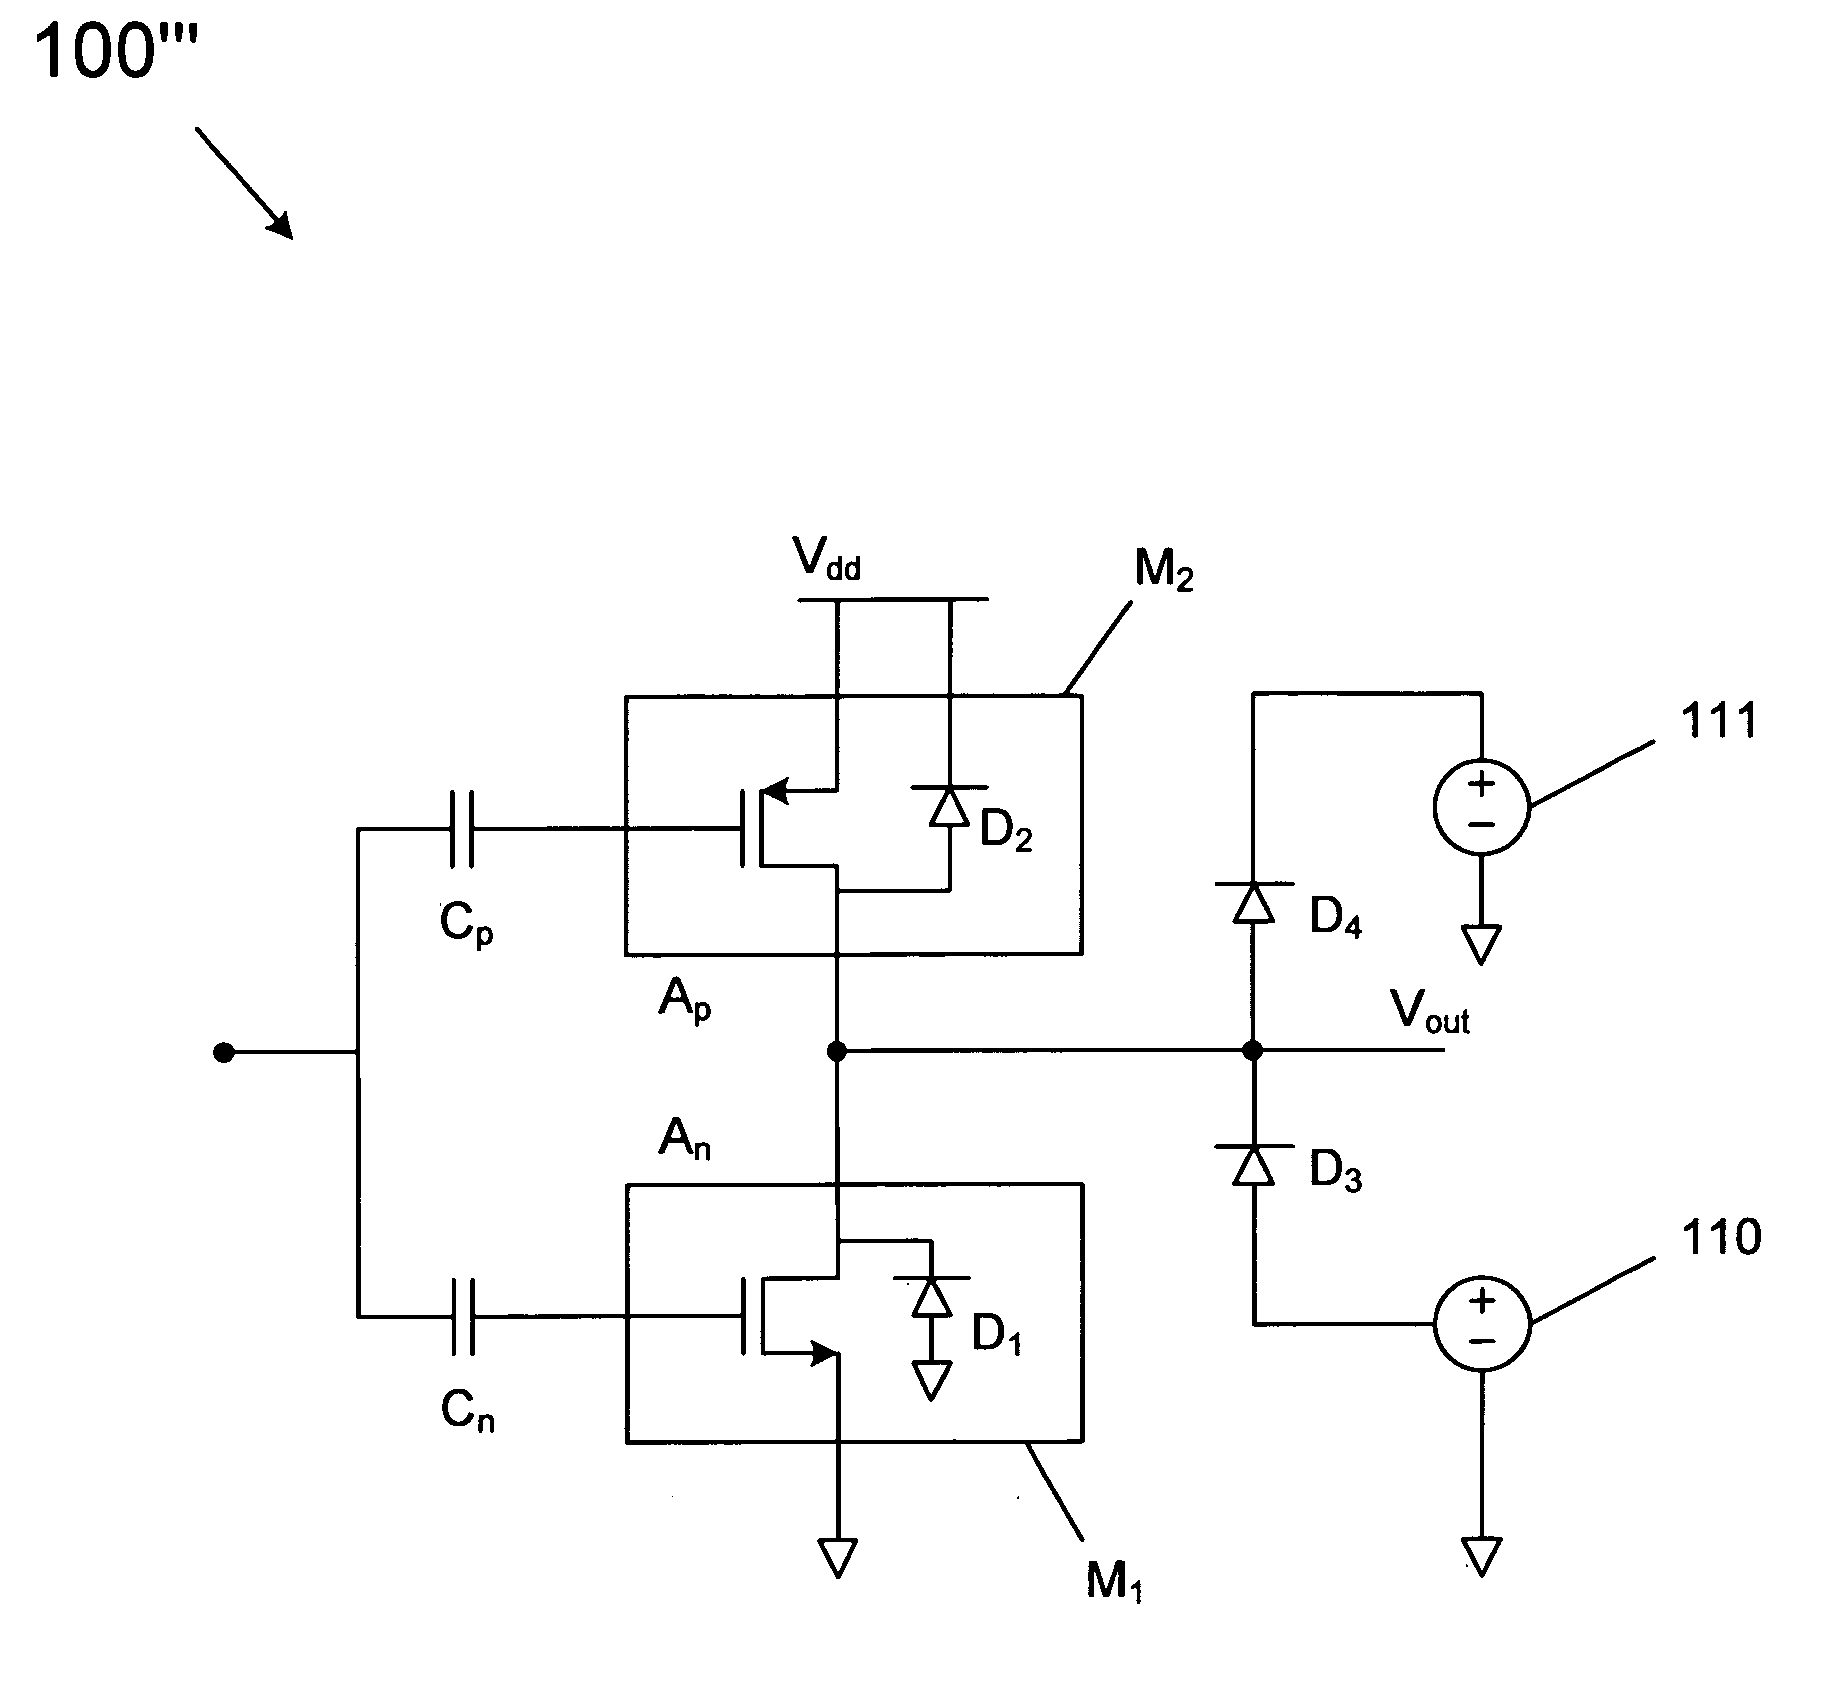 Compensating for non-linear capacitance effects in a power amplifier